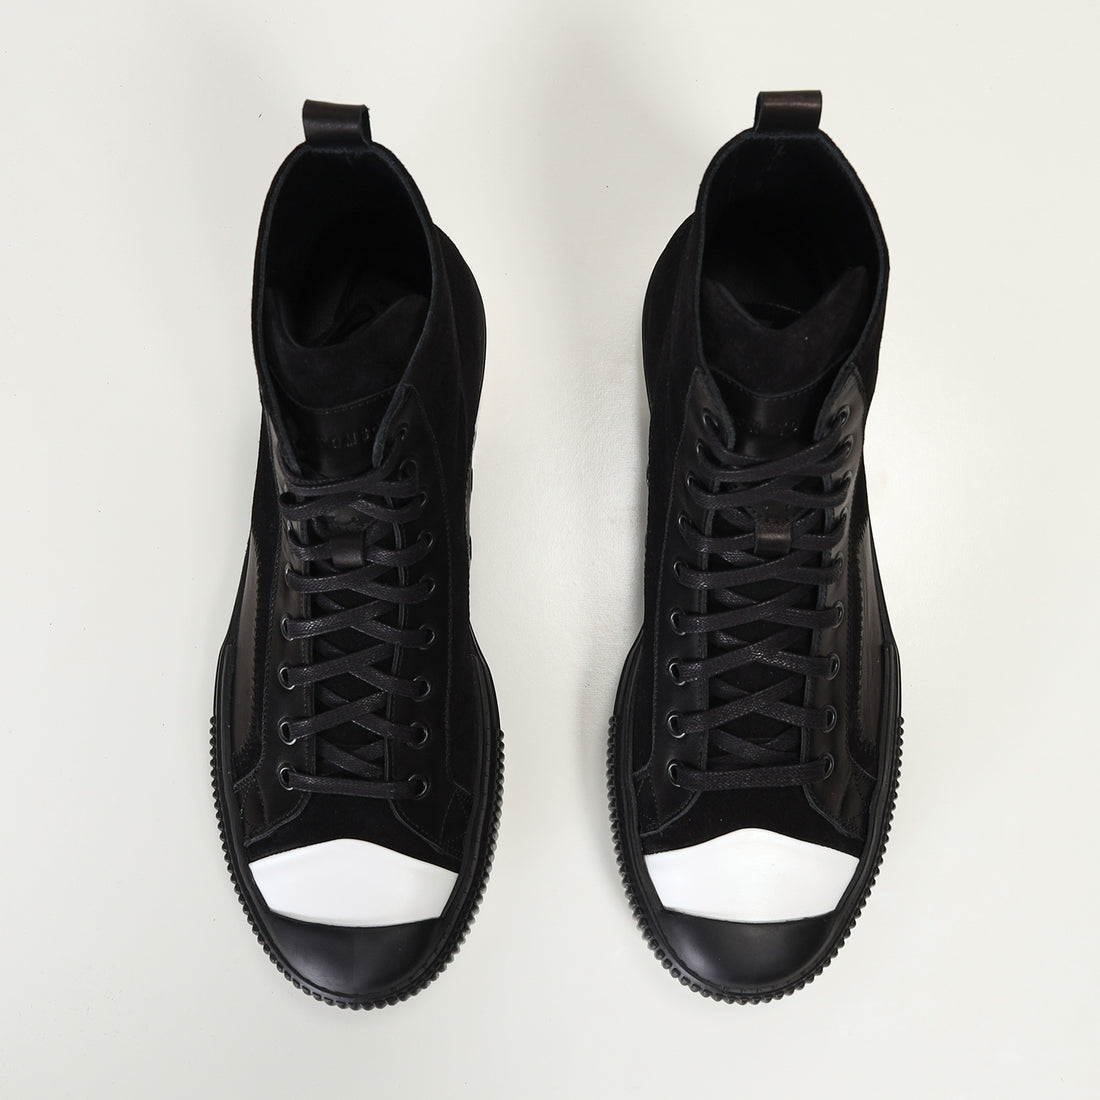 The King Leather and Suede High Tops - Black Suede